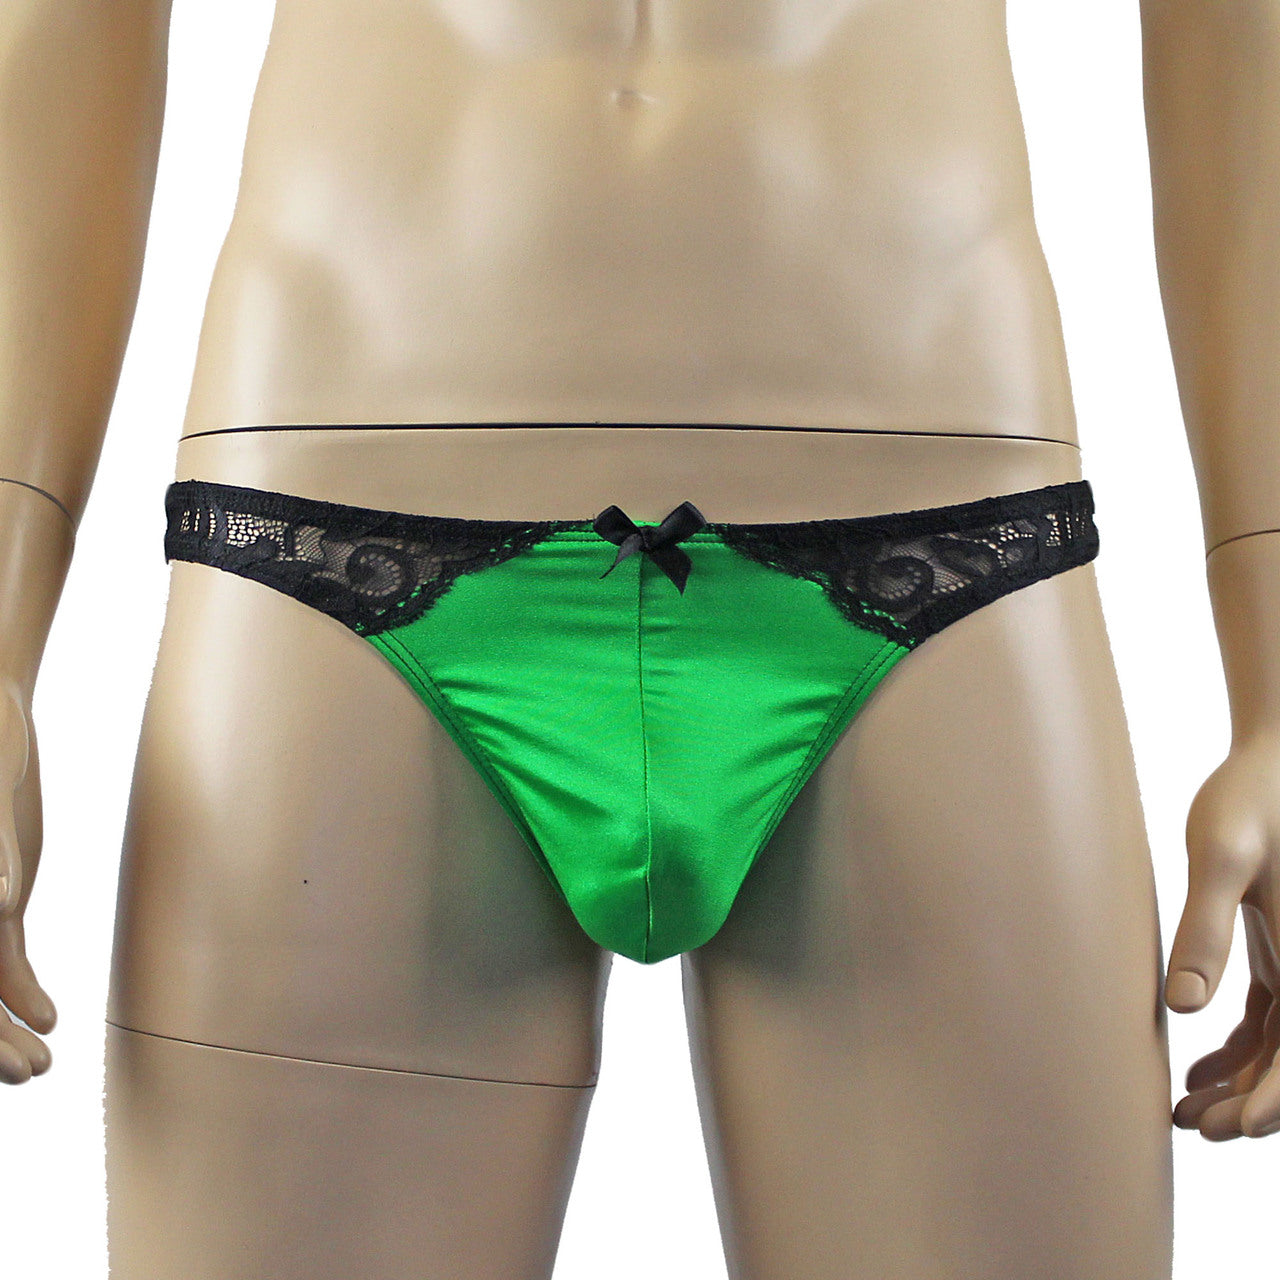 Mens Risque Garterbelt, Thong & Stockings (green and black plus other colours)